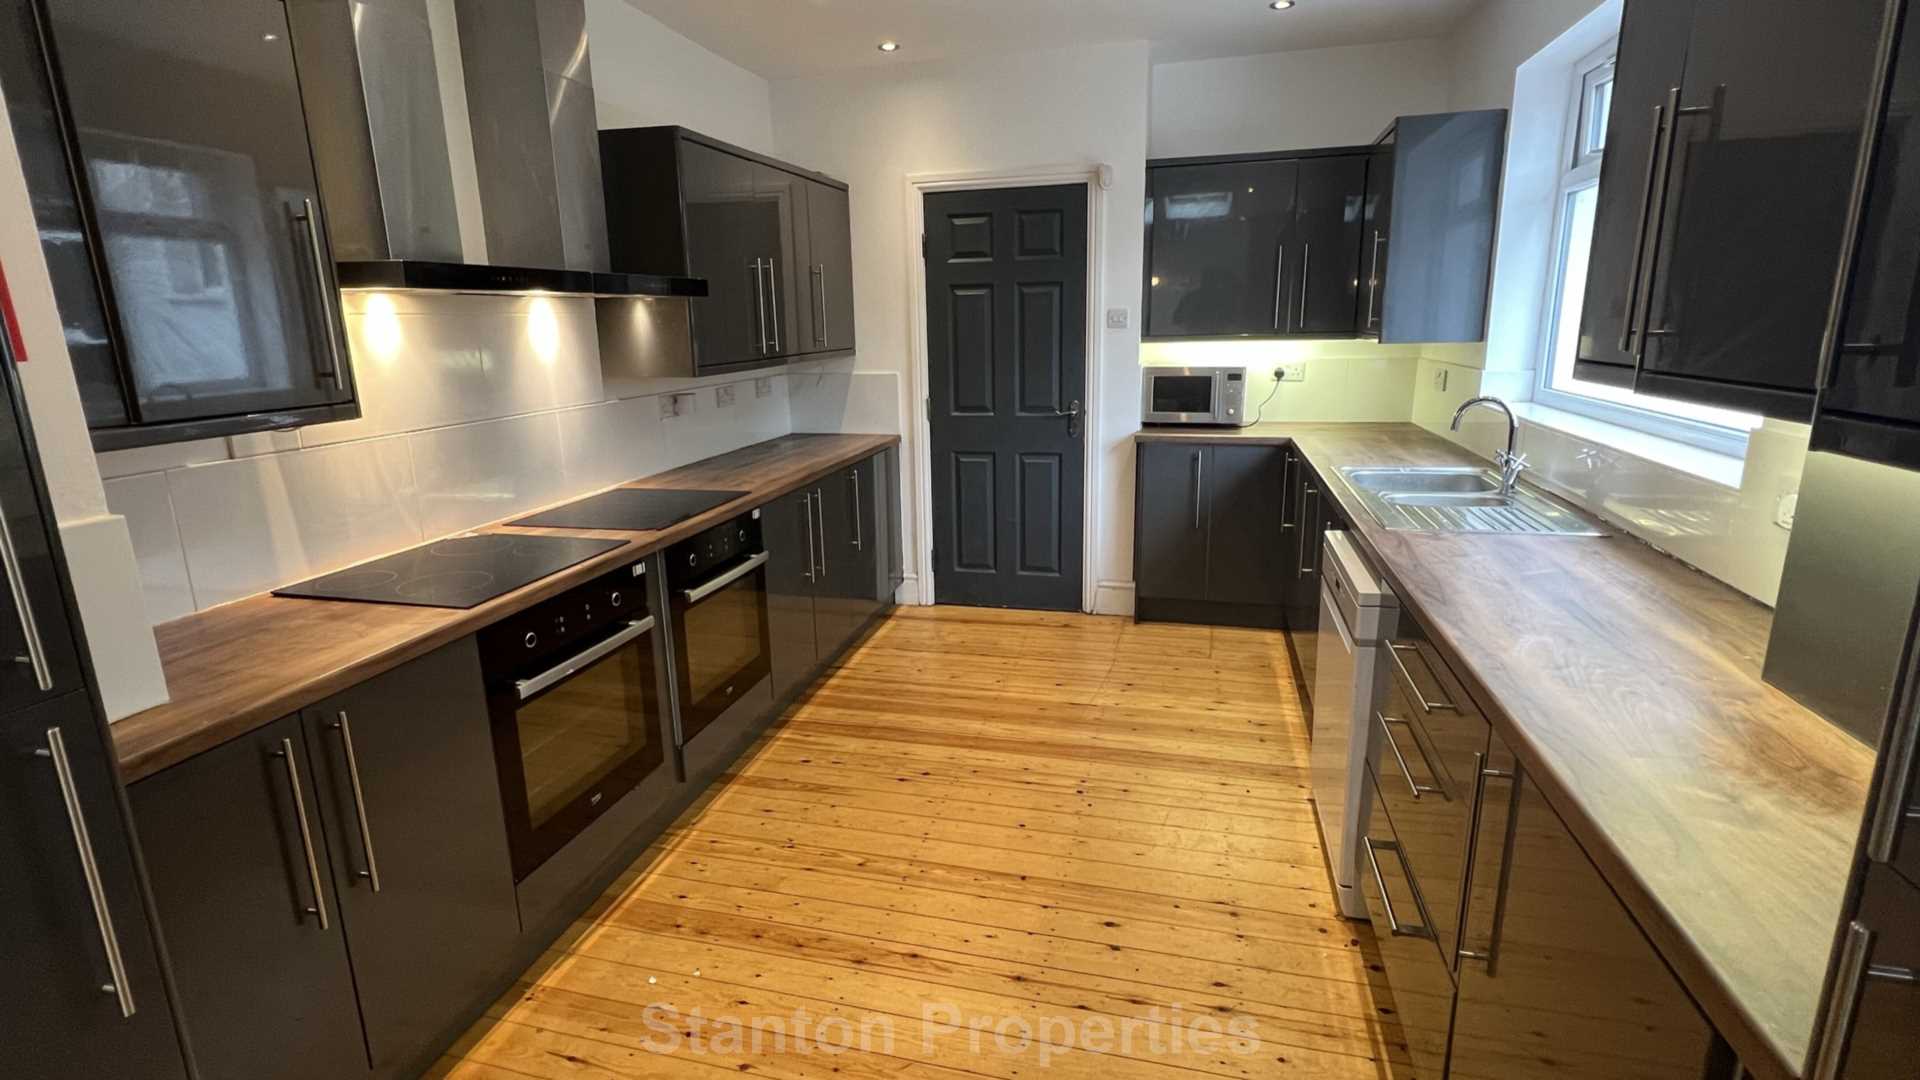 £150 PER WEEK / £650 PER MONTH, Lombard Grove, Manchester, Image 1